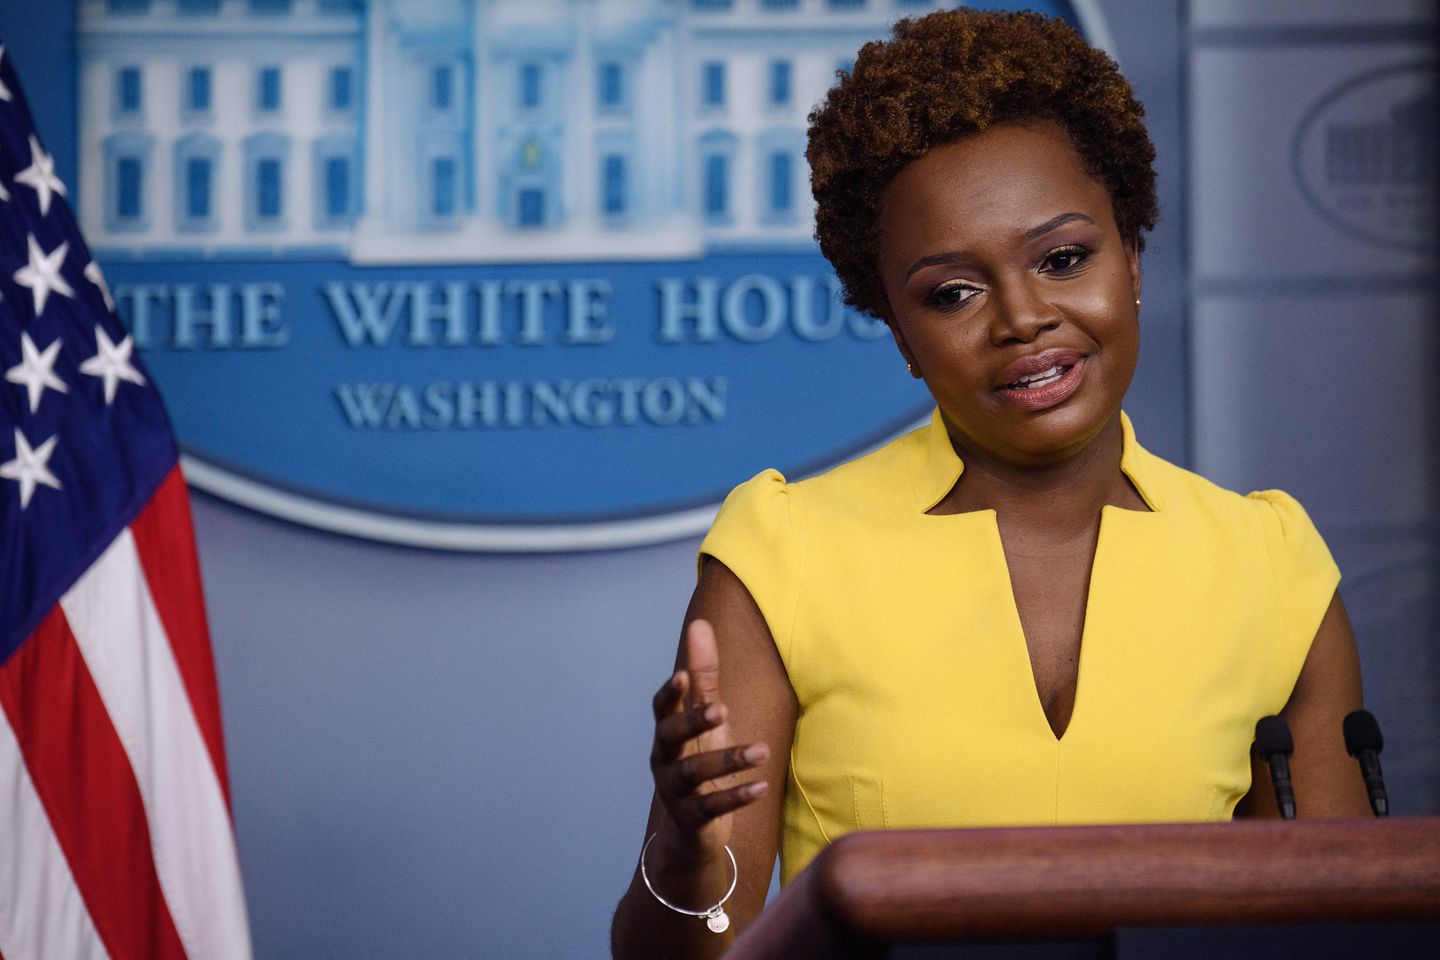 Openly Gay Caribbean Native Makes History in the U.S. White House